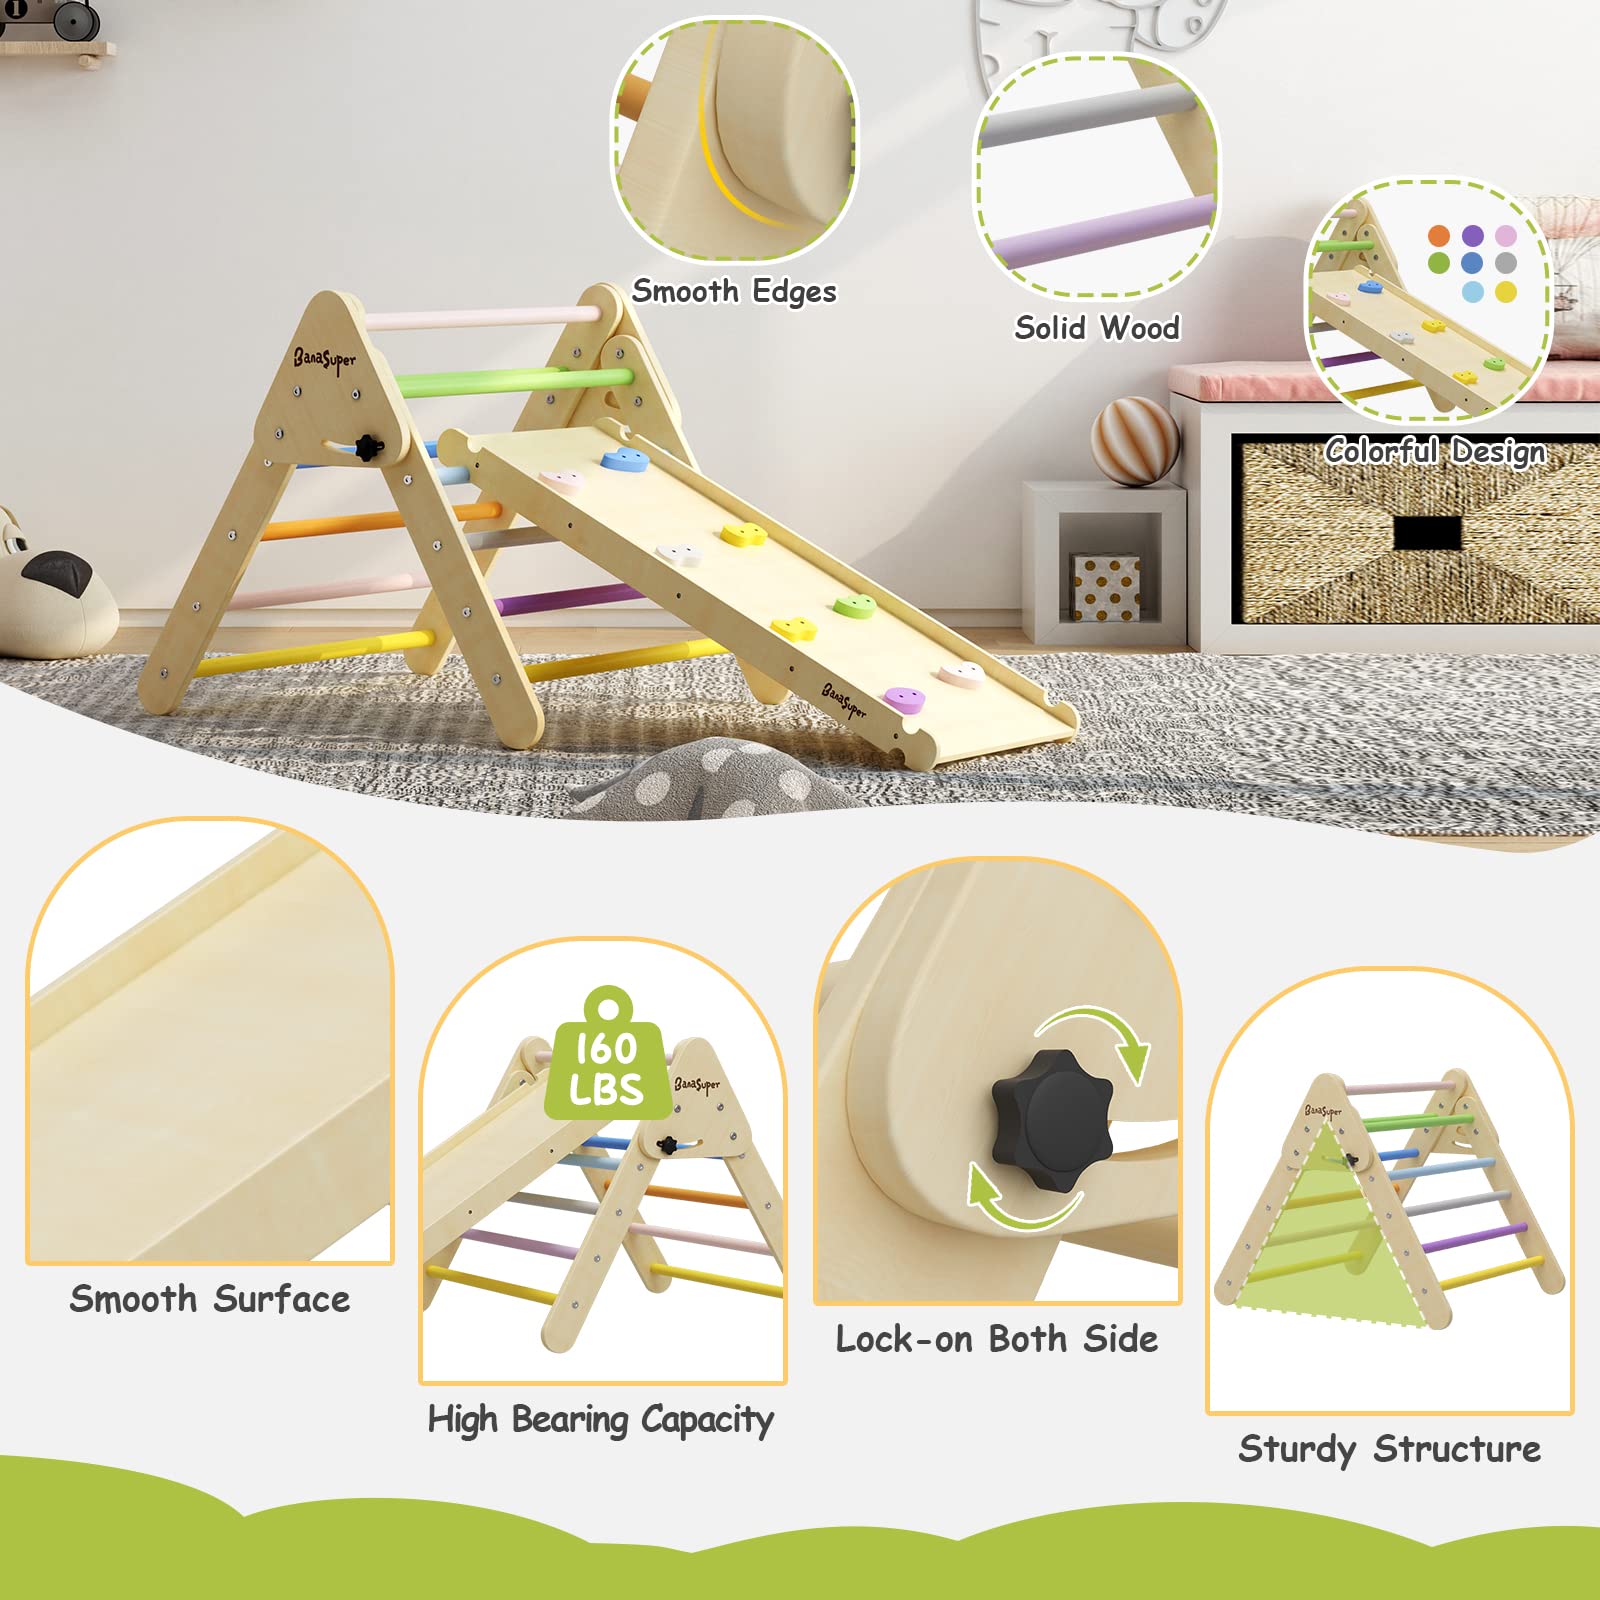 BanaSuper Colorful 2 in 1 Triangle Climber with Ramp Foldable Wooden Climbing Triangle Ladder Set Toddler Montessori Climbing Toys for Baby Ourdoor Indoor Playground Play Gym Gift for Boys Girls